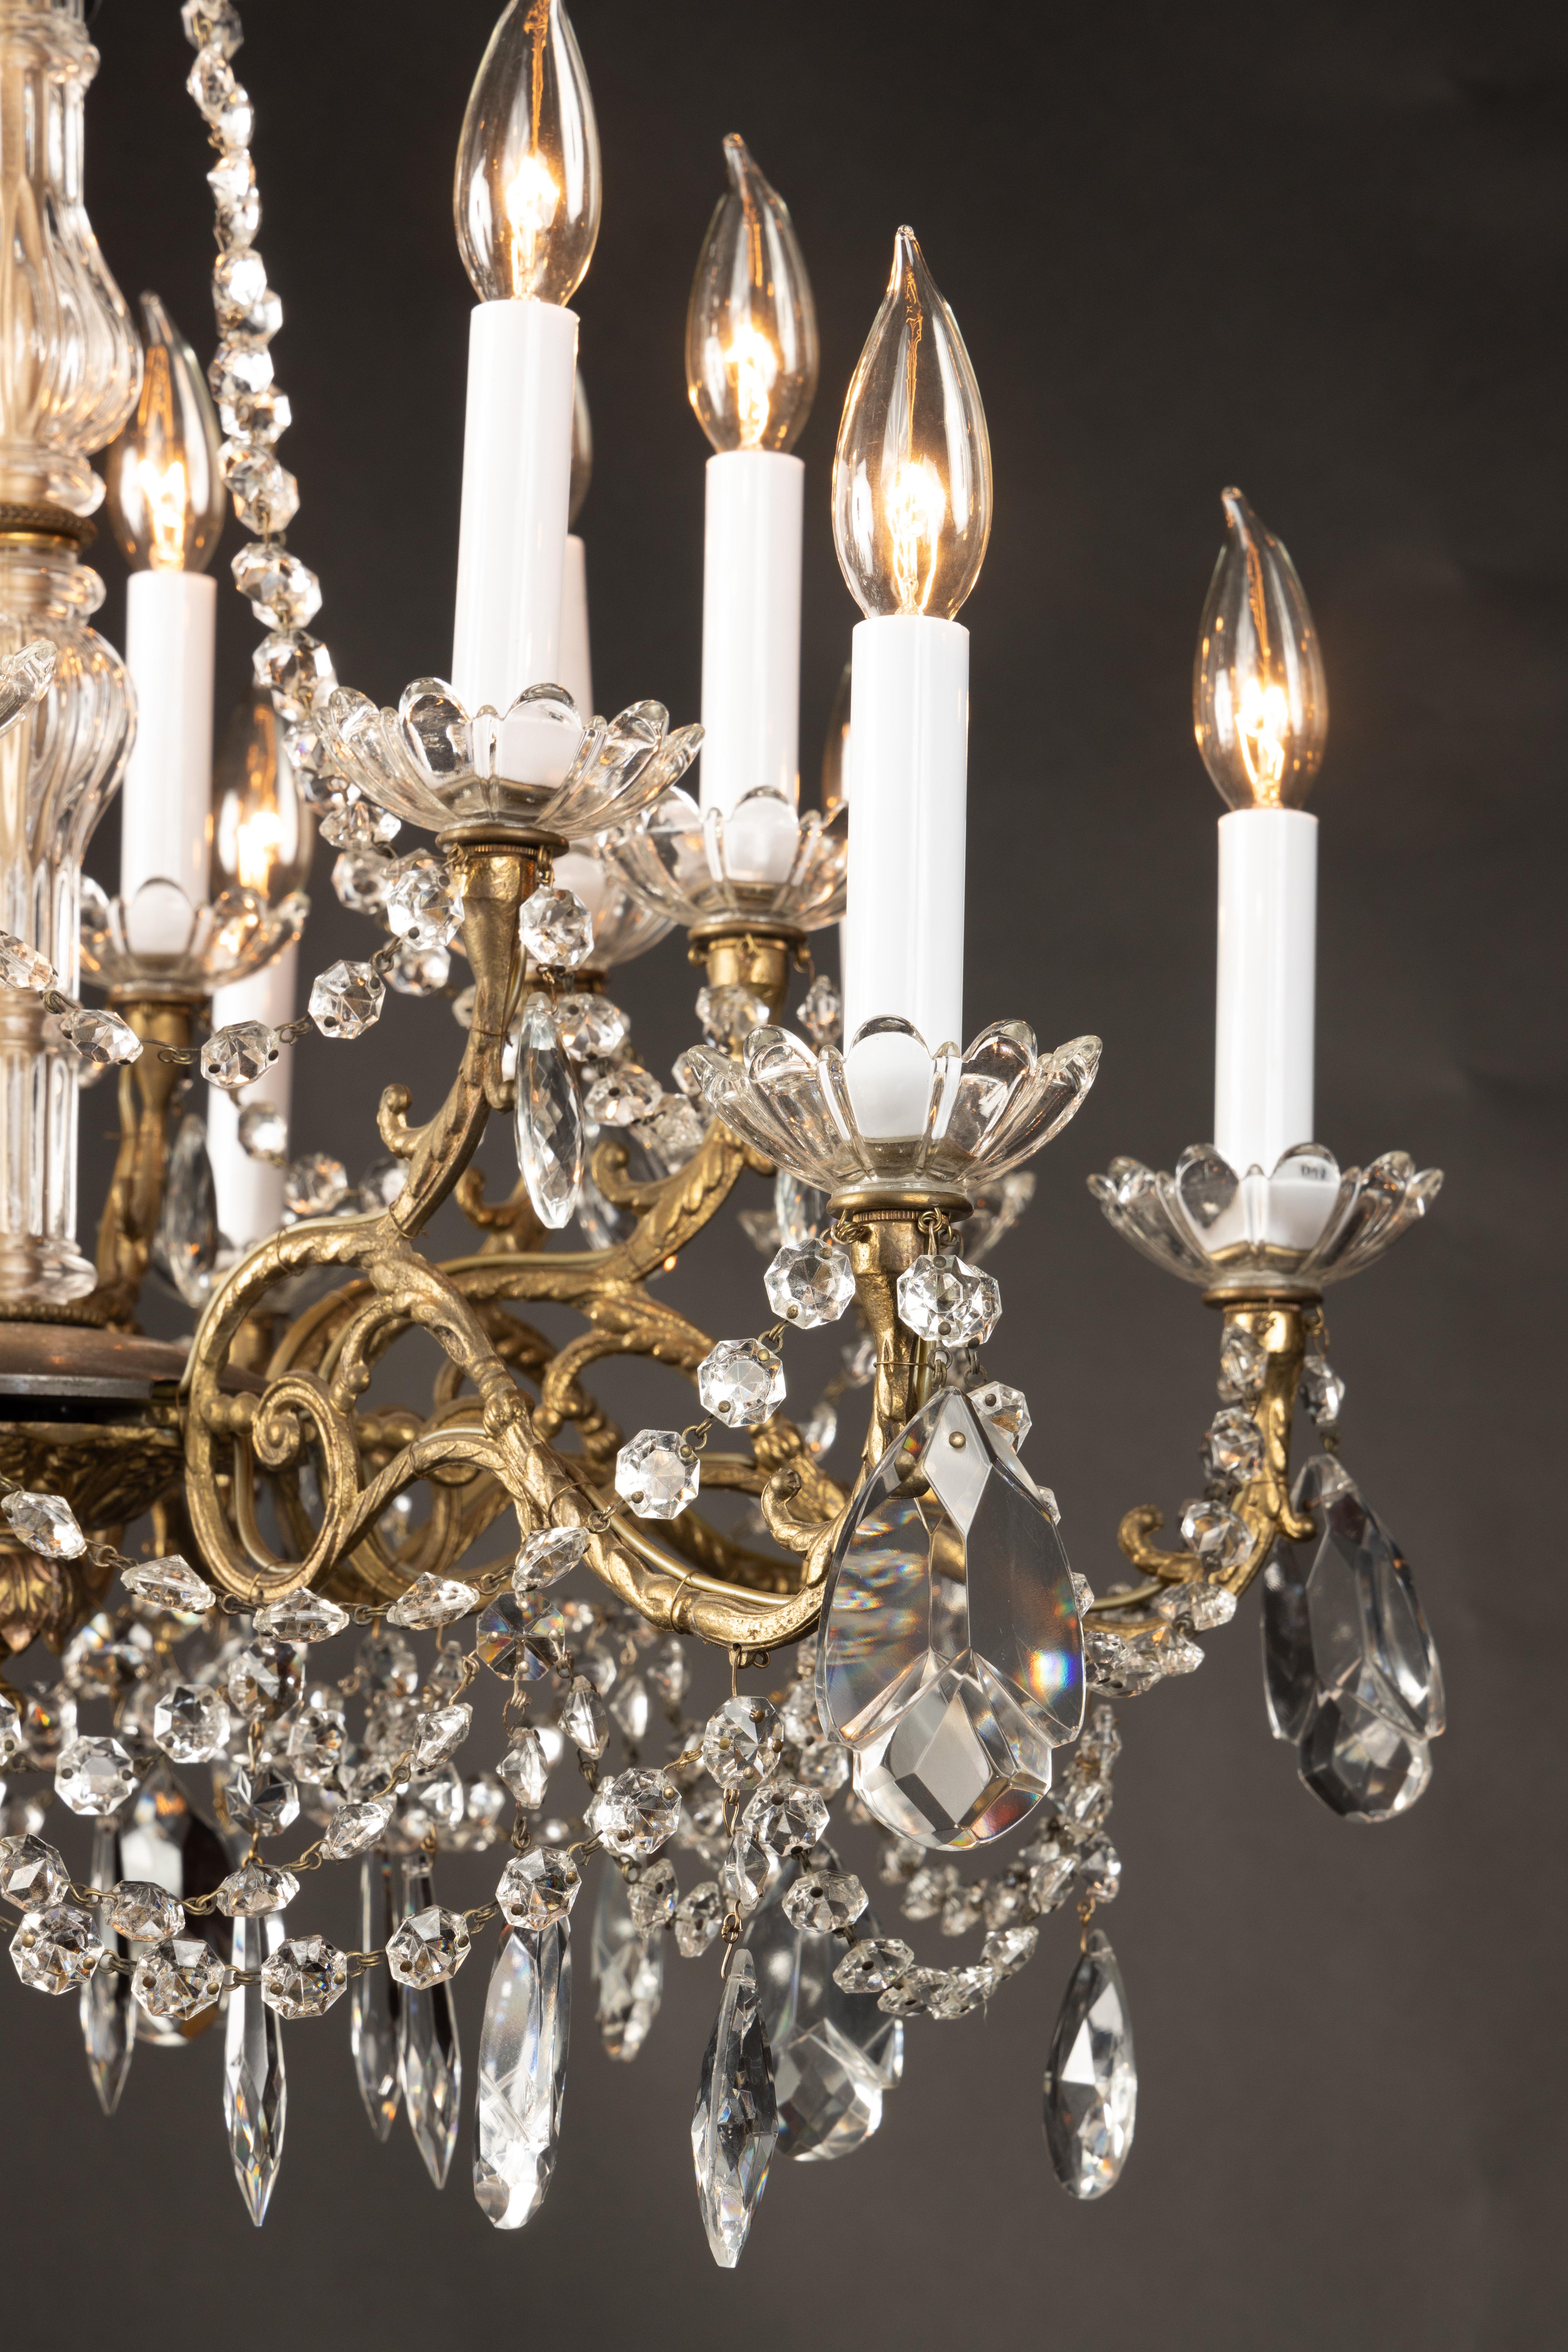 This elegant Napoleon III two tier chandelier is made of bronze and draped with ropes of octagon-cut crystals, pear-shaped teardrop crystals, and crystal spears. The French antique fixture dates back to the late 19th century and plays host to a